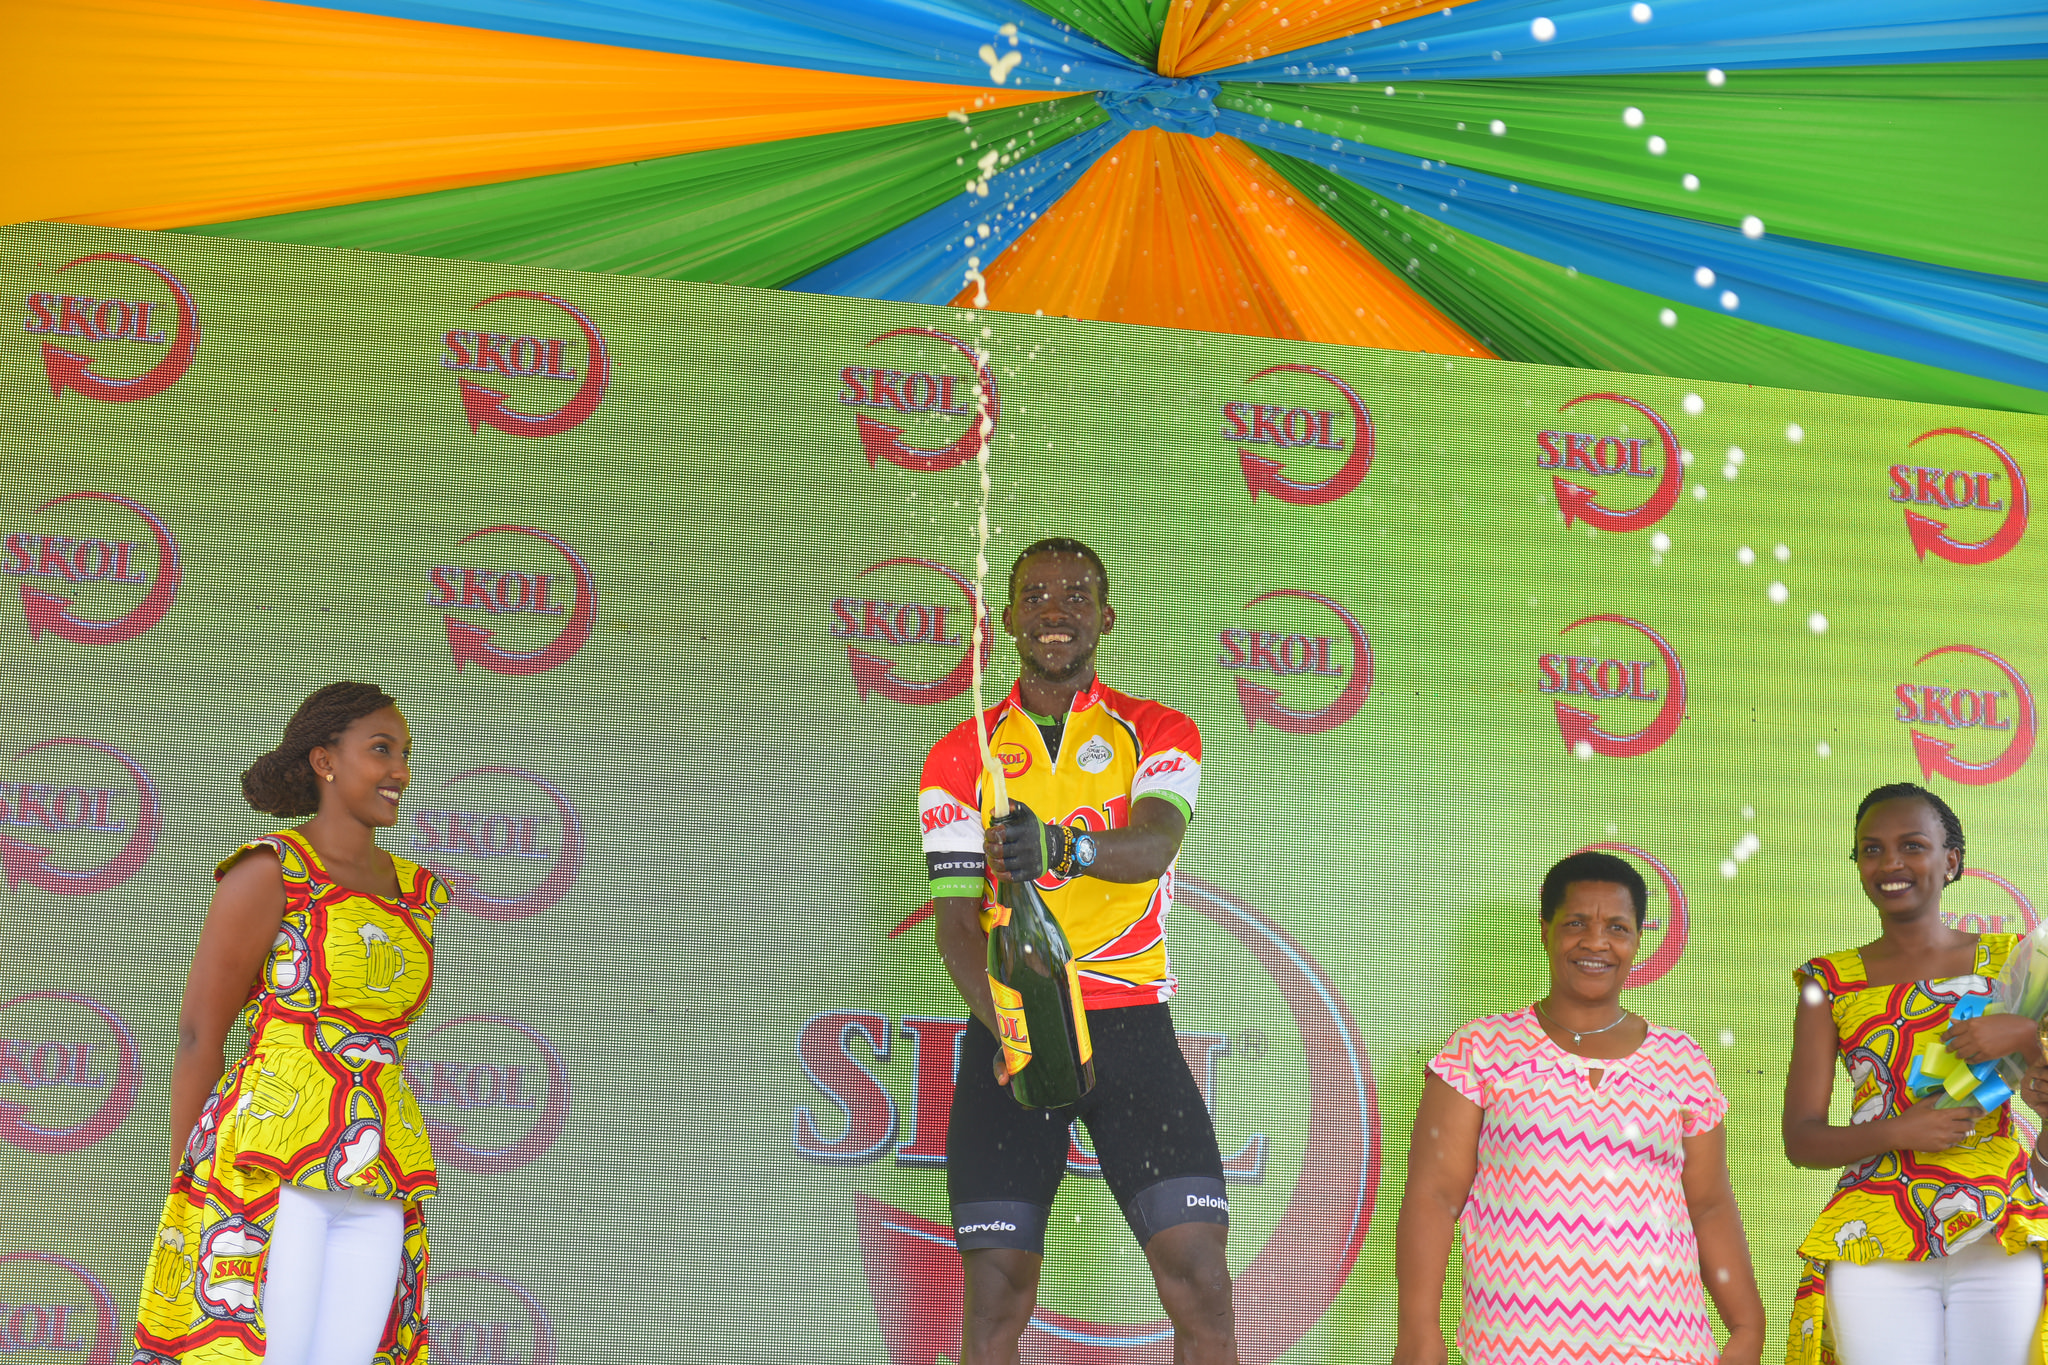 Why Skol Pulled Out of Tour du Rwanda 2021